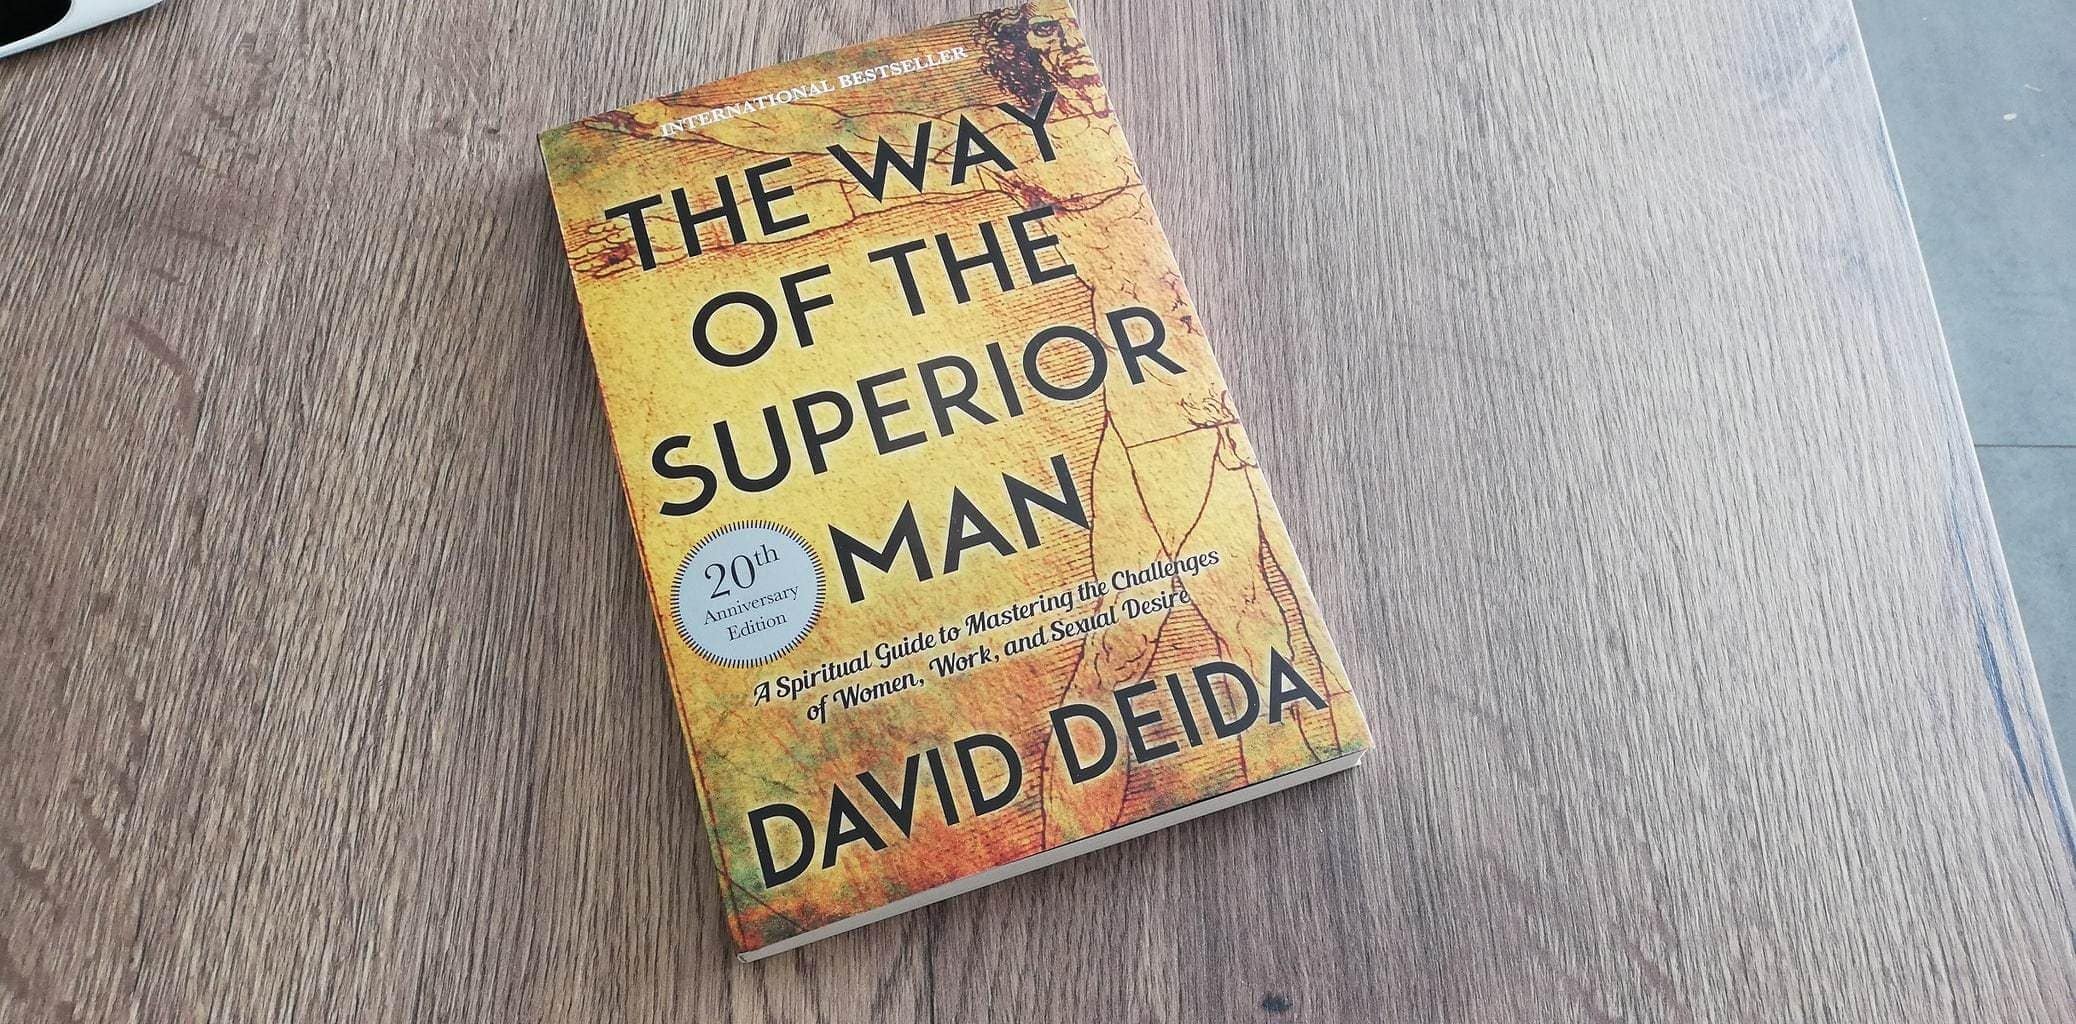 The way of the superior man paperback book